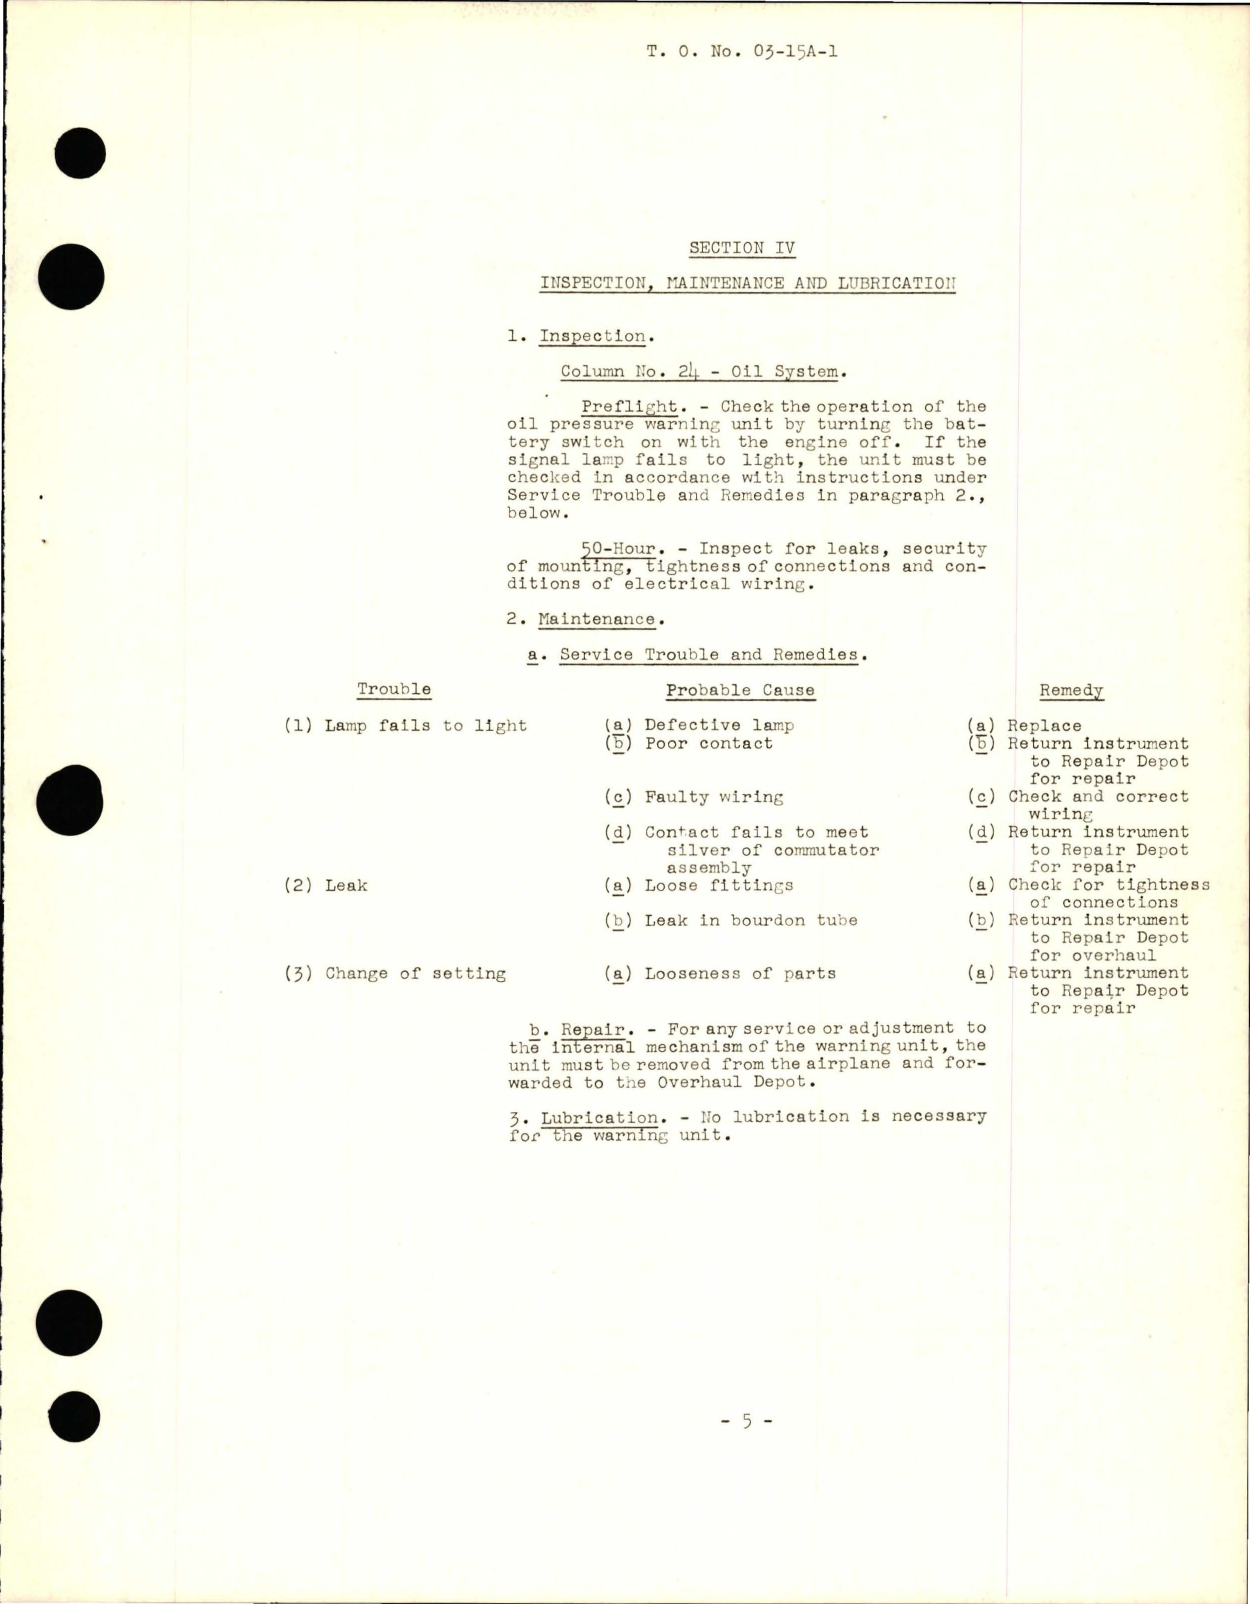 Sample page 7 from AirCorps Library document: Operation, Service and Overhaul Instructions with Parts Catalog for Oil Pressure Warning Unit - Part 3122-1-A